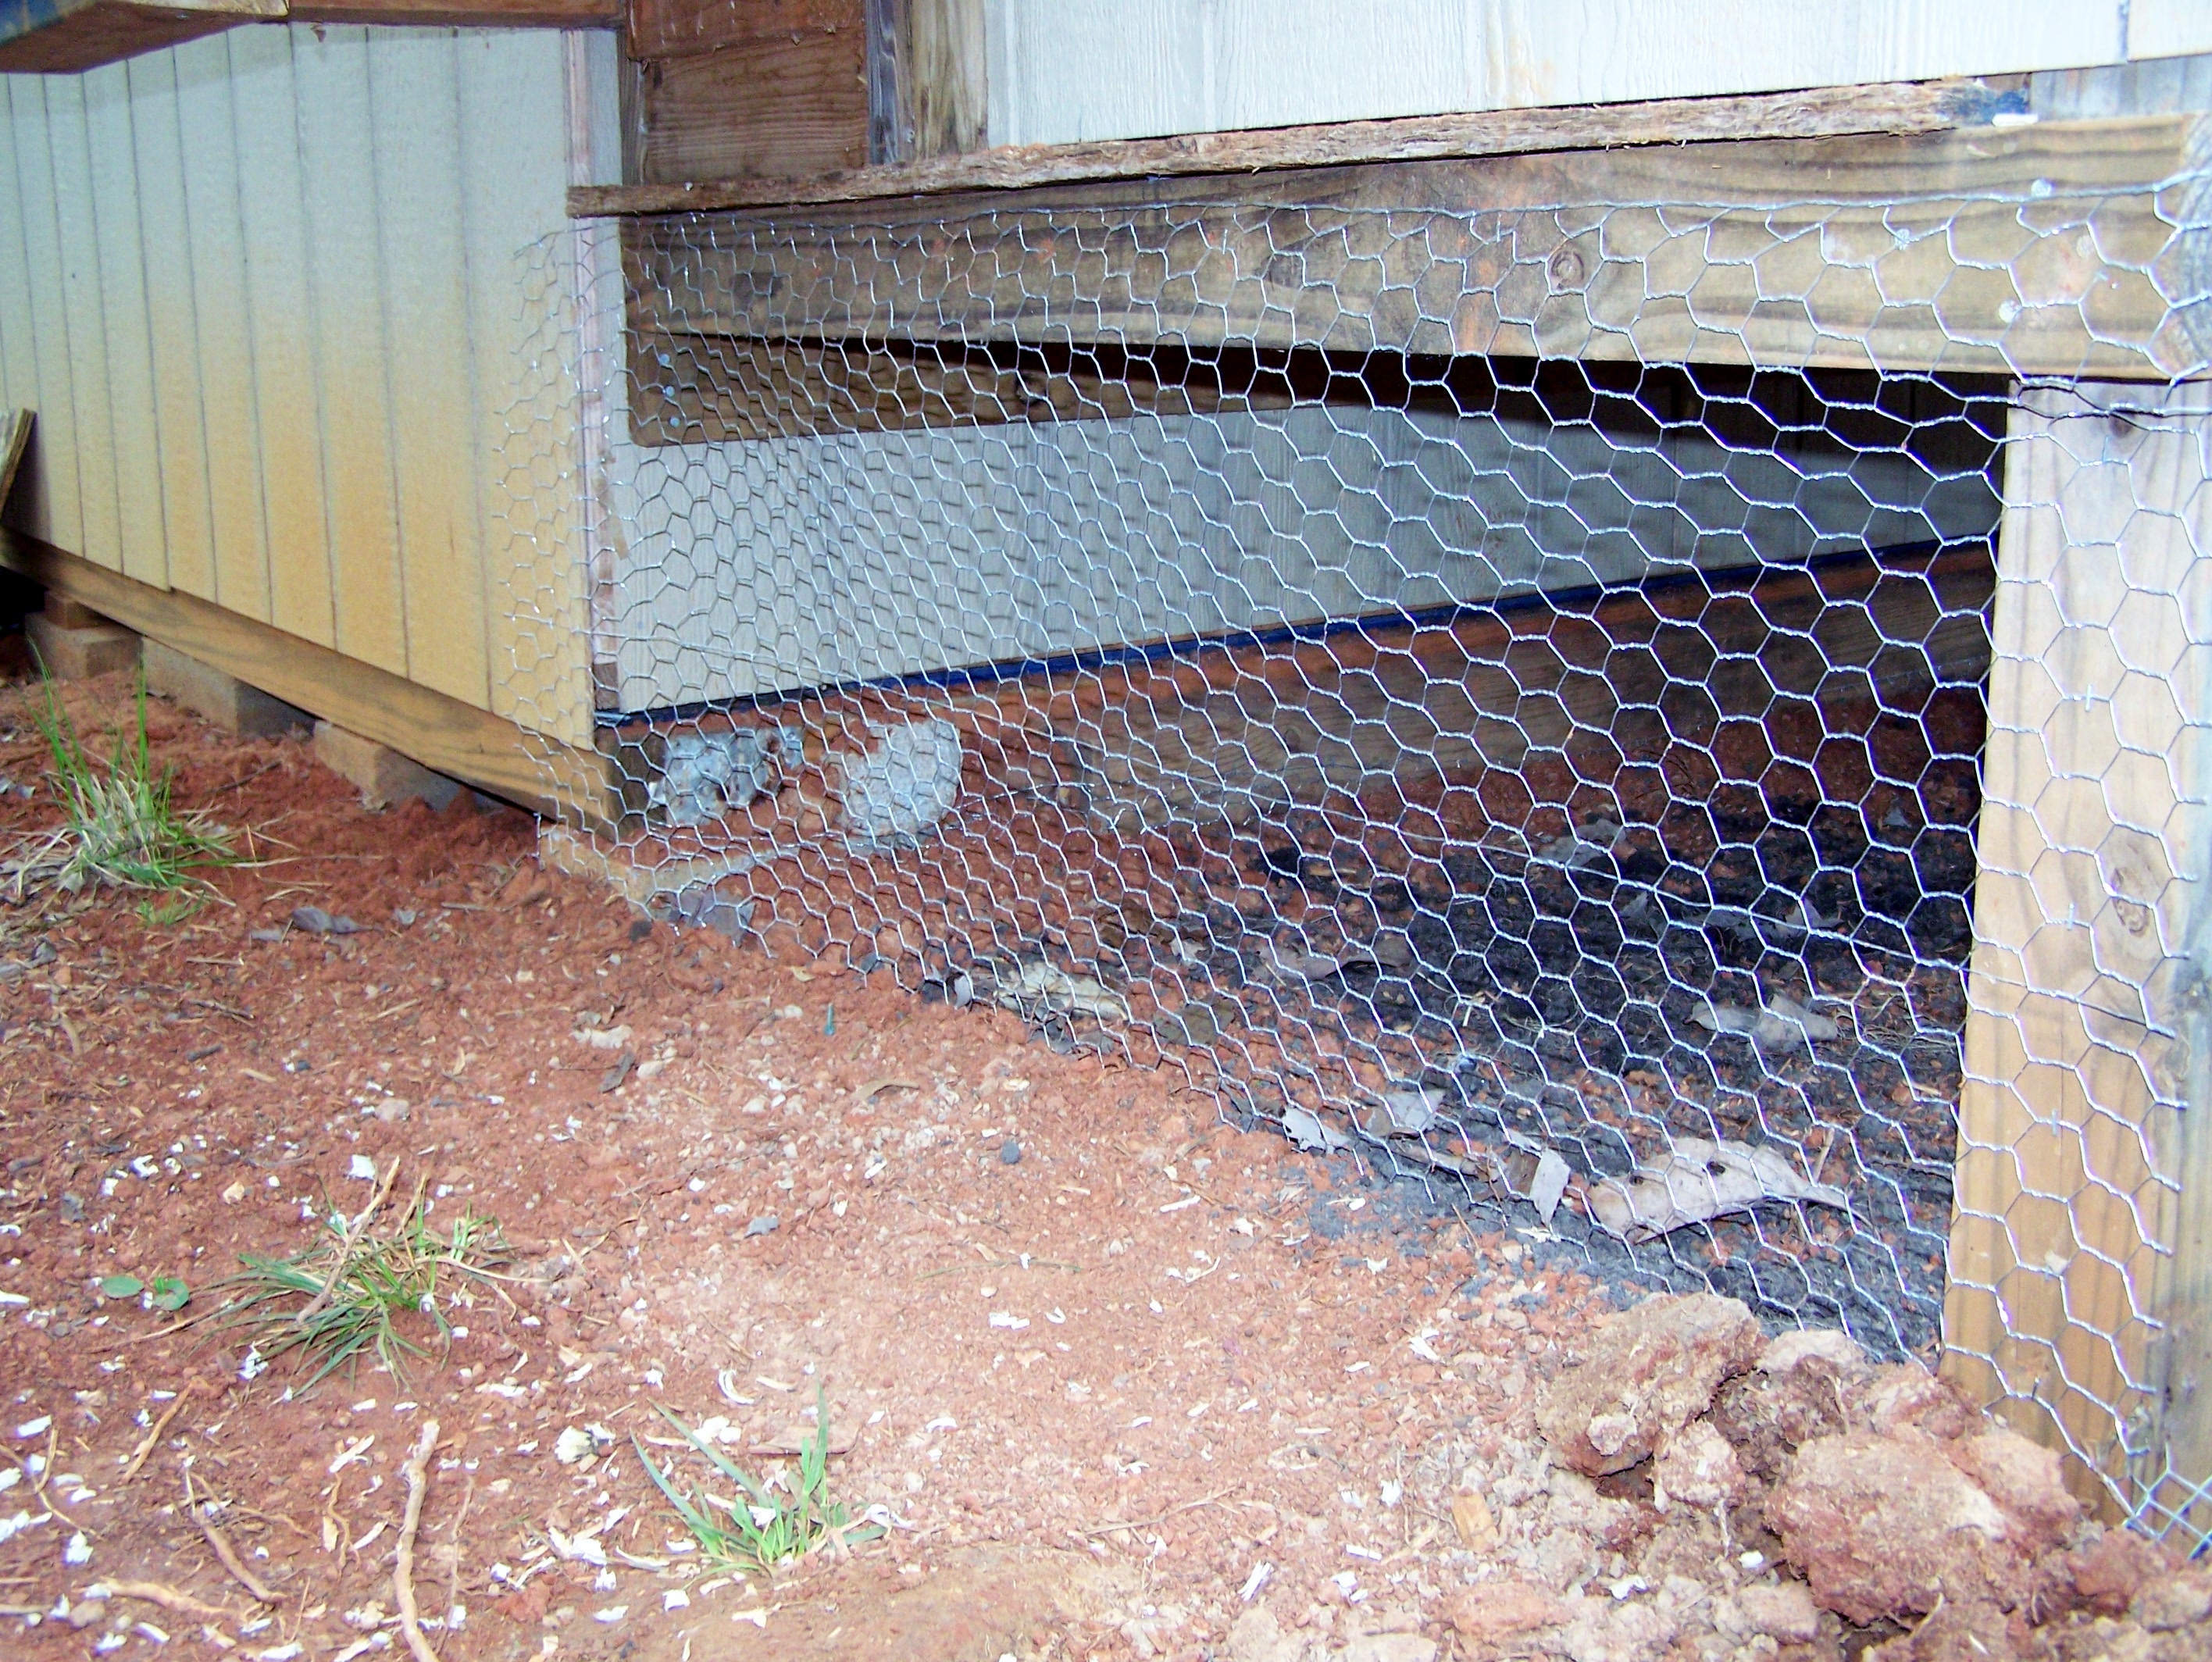 Chicken Coop And Run Progress   My Life In The Country  hardware cloth under chicken coop